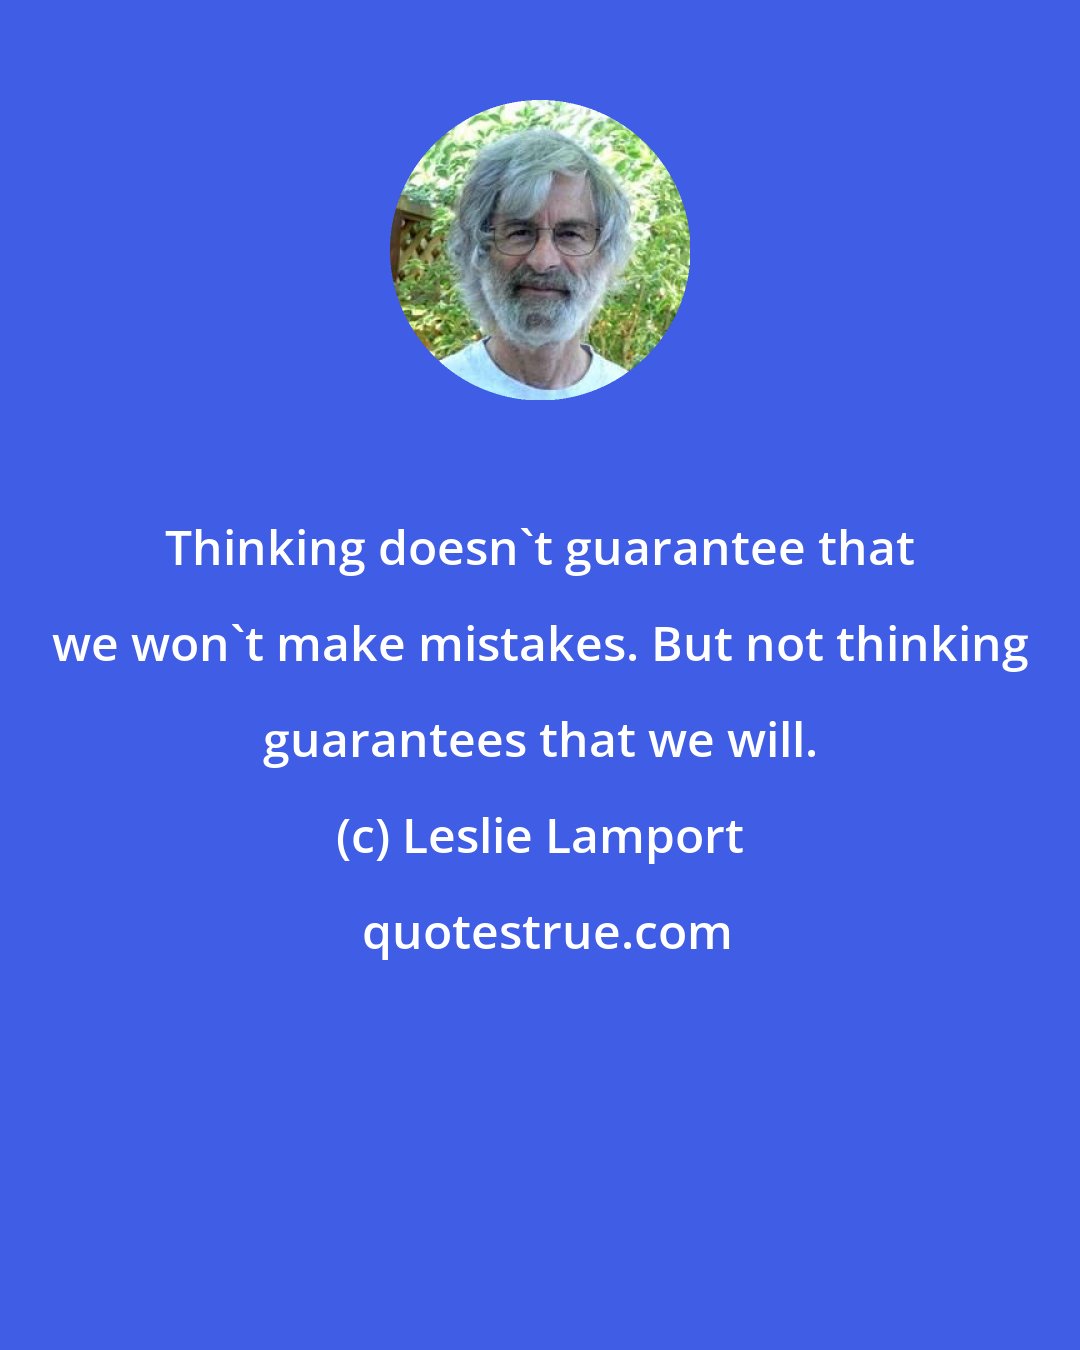 Leslie Lamport: Thinking doesn't guarantee that we won't make mistakes. But not thinking guarantees that we will.